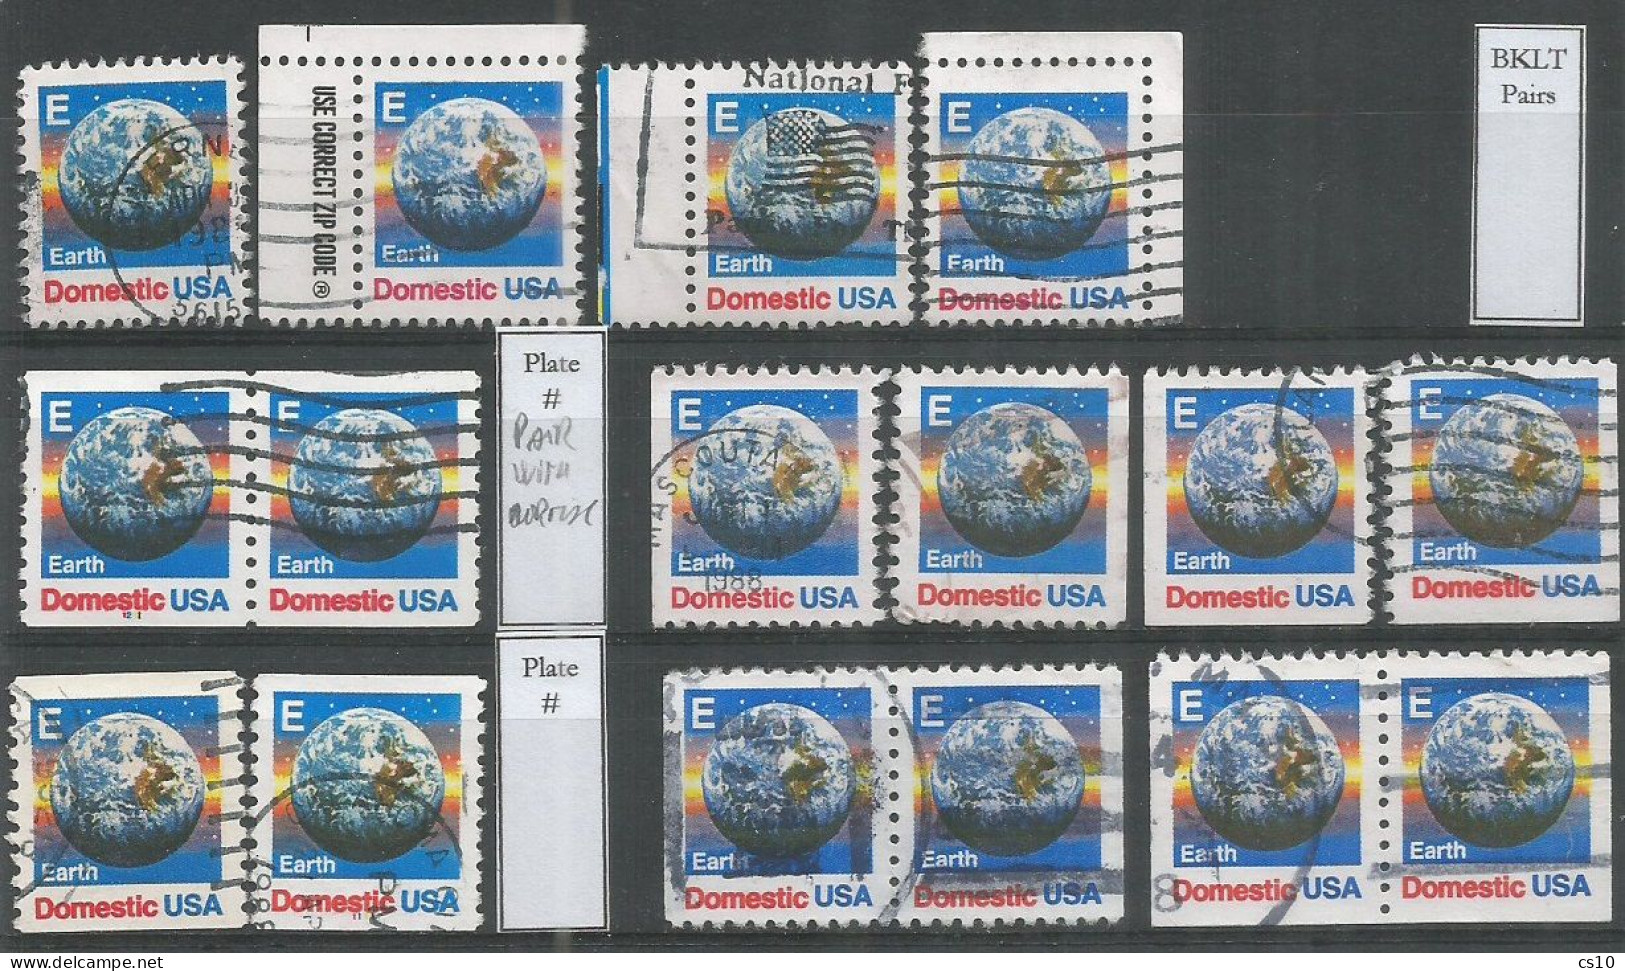 USA 1988 "E" Rate Stamp SC.#2277 +2279+2282 : Cpl Issue Sheet + Margin/corner - Coil + Plate # - Booklets With Pairs - 1941-80